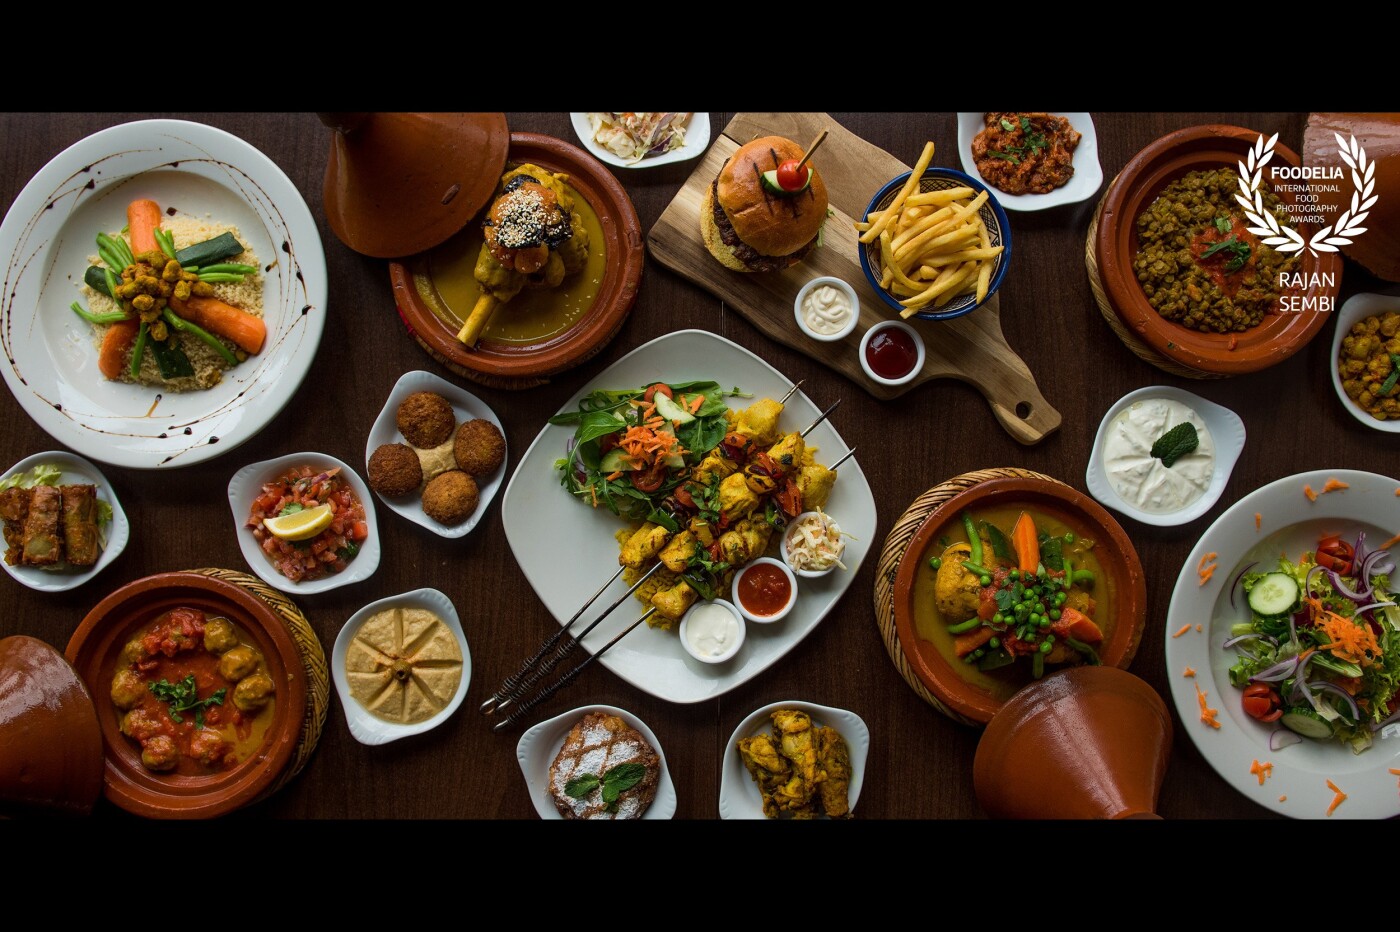 Meal from Morocco. This photo includes a range of modern Moroccan dishes including starters and mains. Using a Tajine is a key part of Moroccan tradition in their cuisine, so it was important to me to feature them in this photo.<br />
<br />
I used a Nikon D750 with a 24-70mm lens to shoot this.